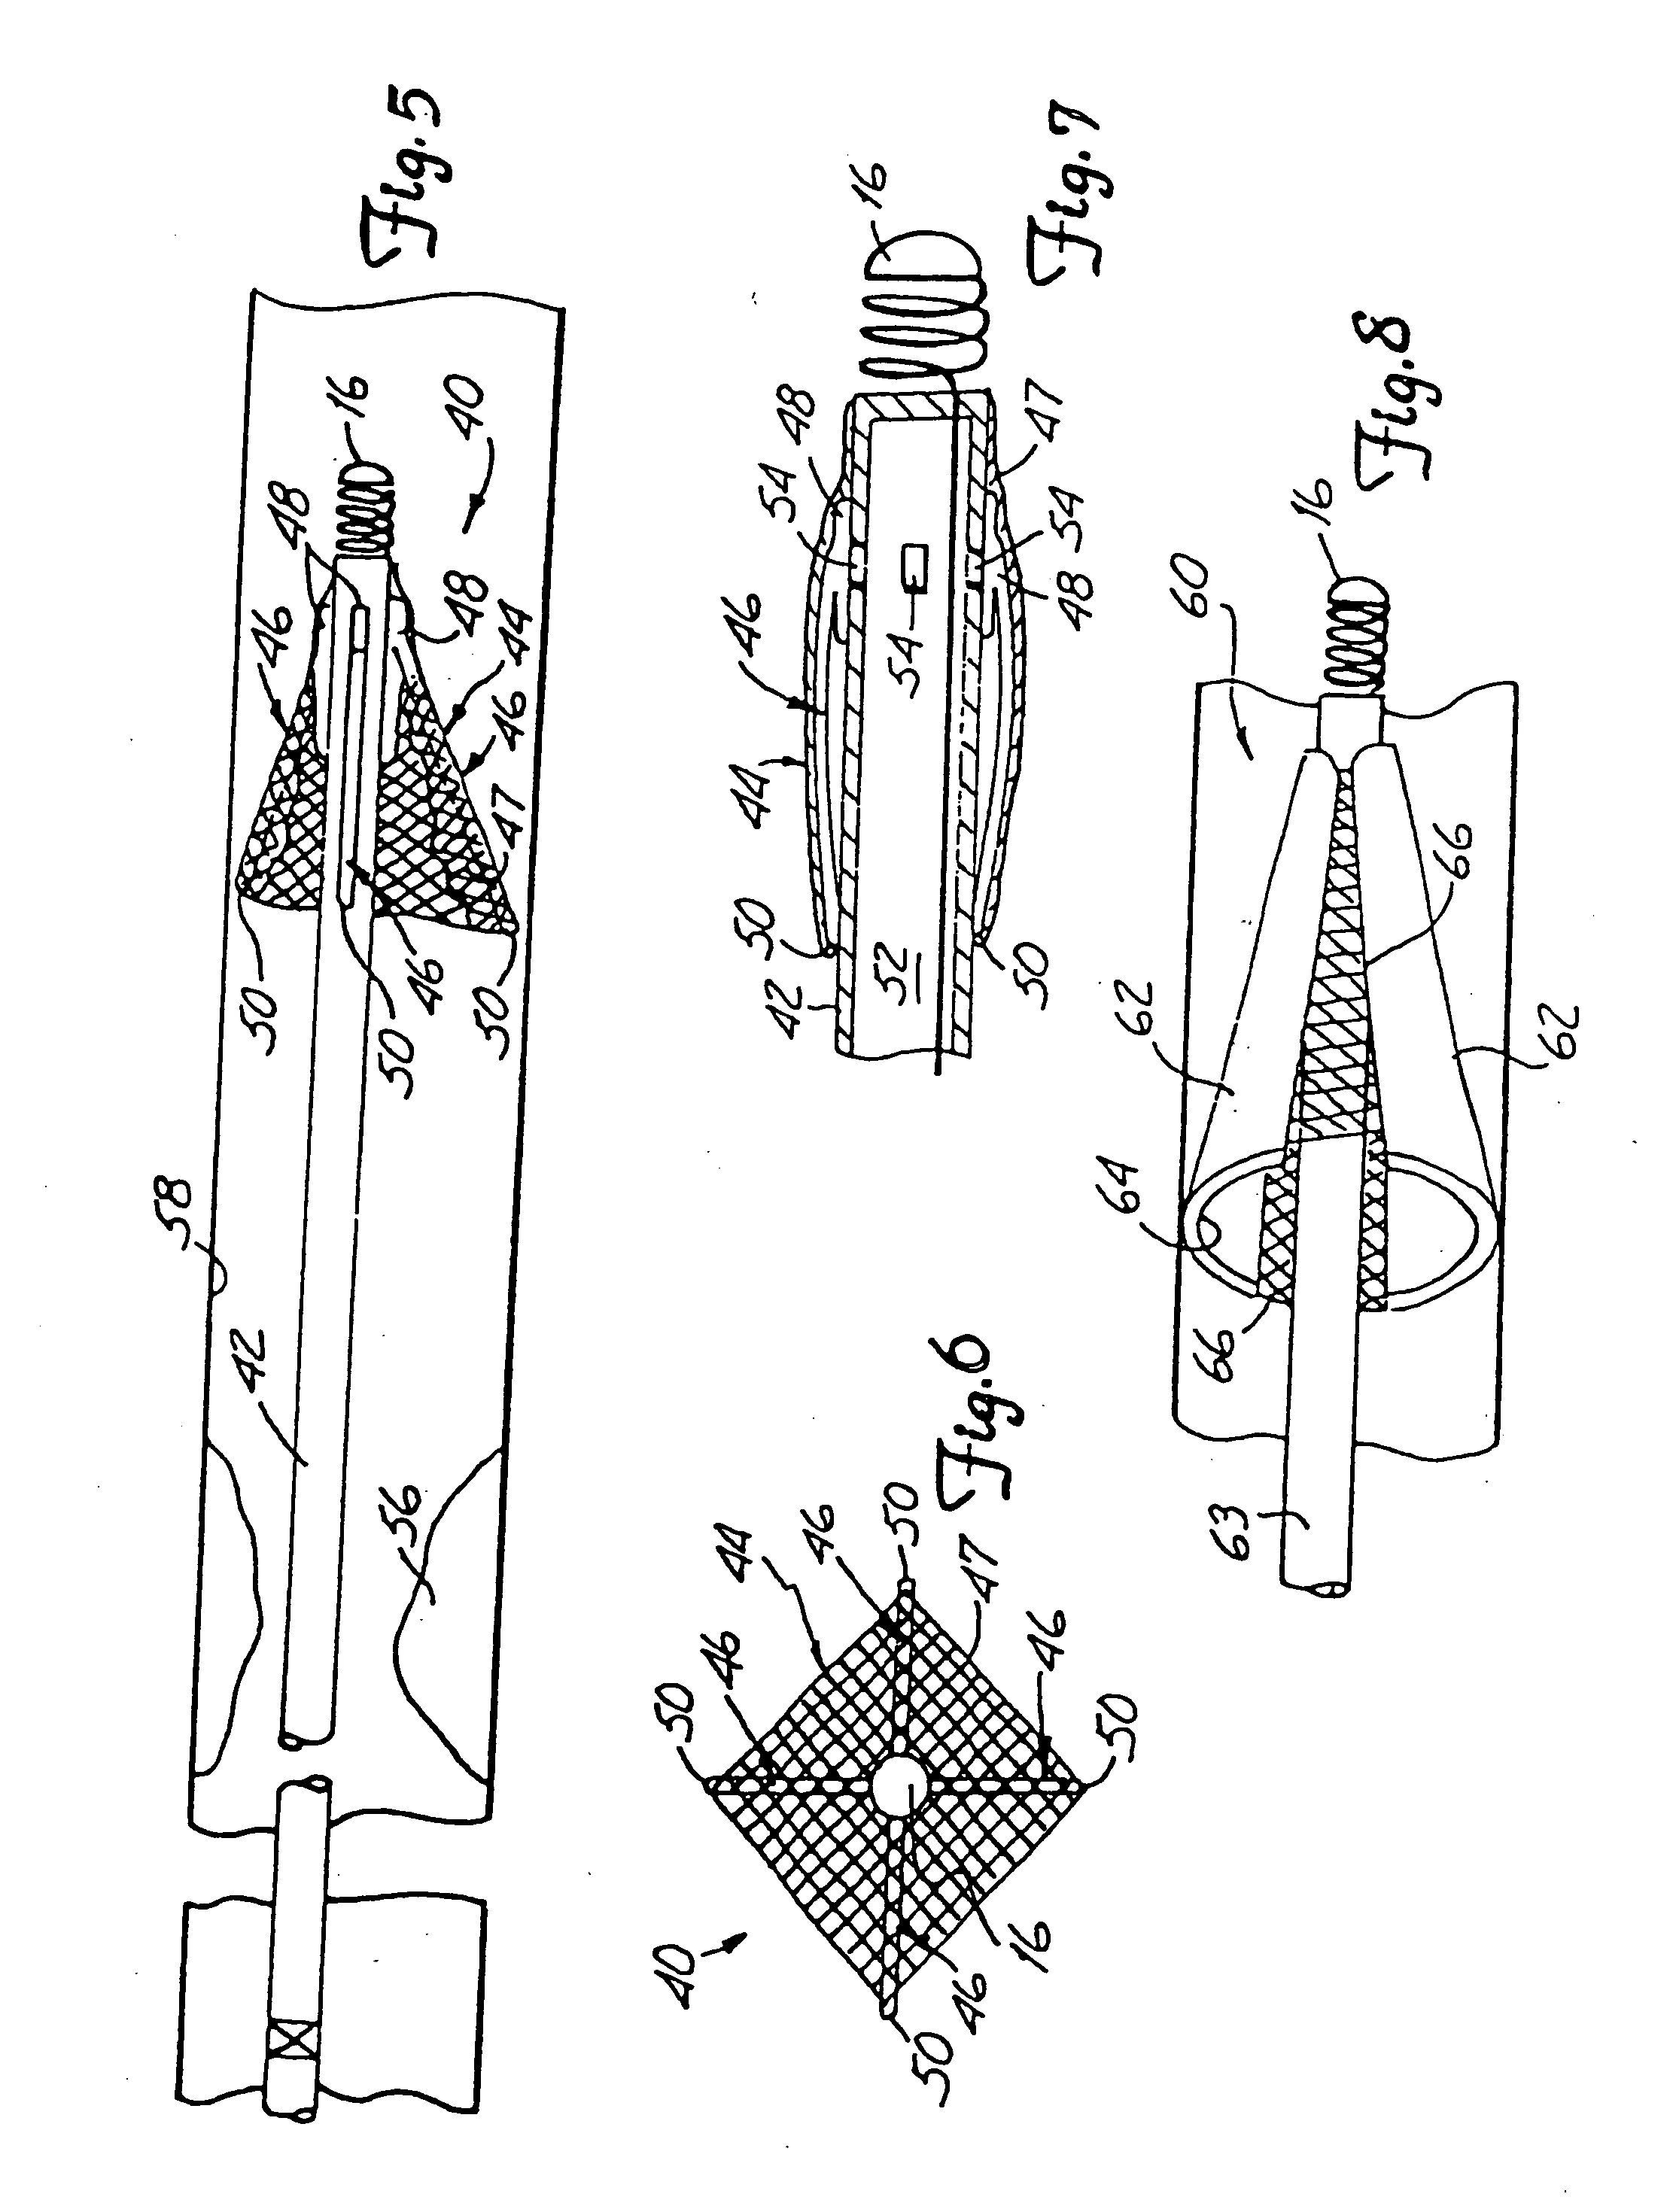 Distal protection device and method